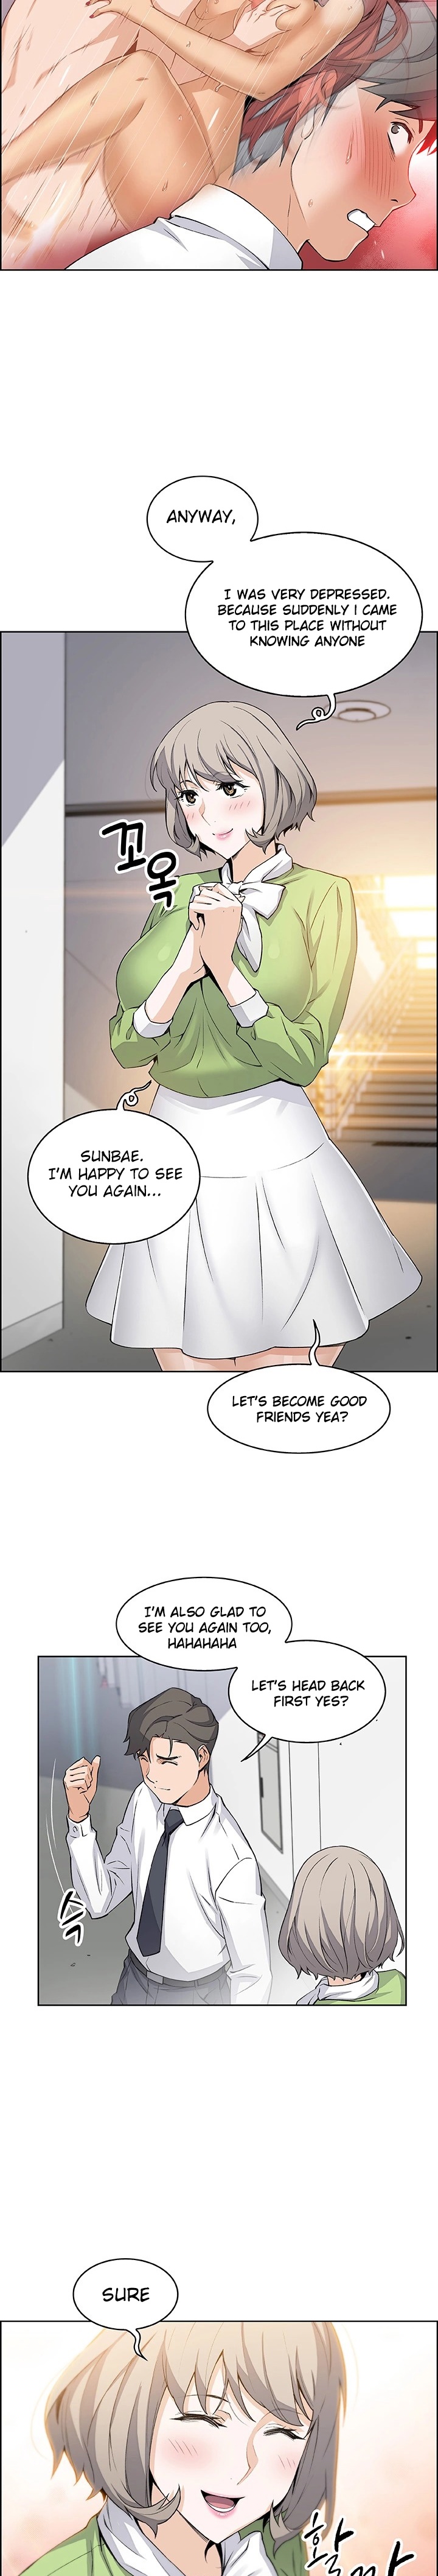 Housekeeper Manhwa - Chapter 15 Page 5